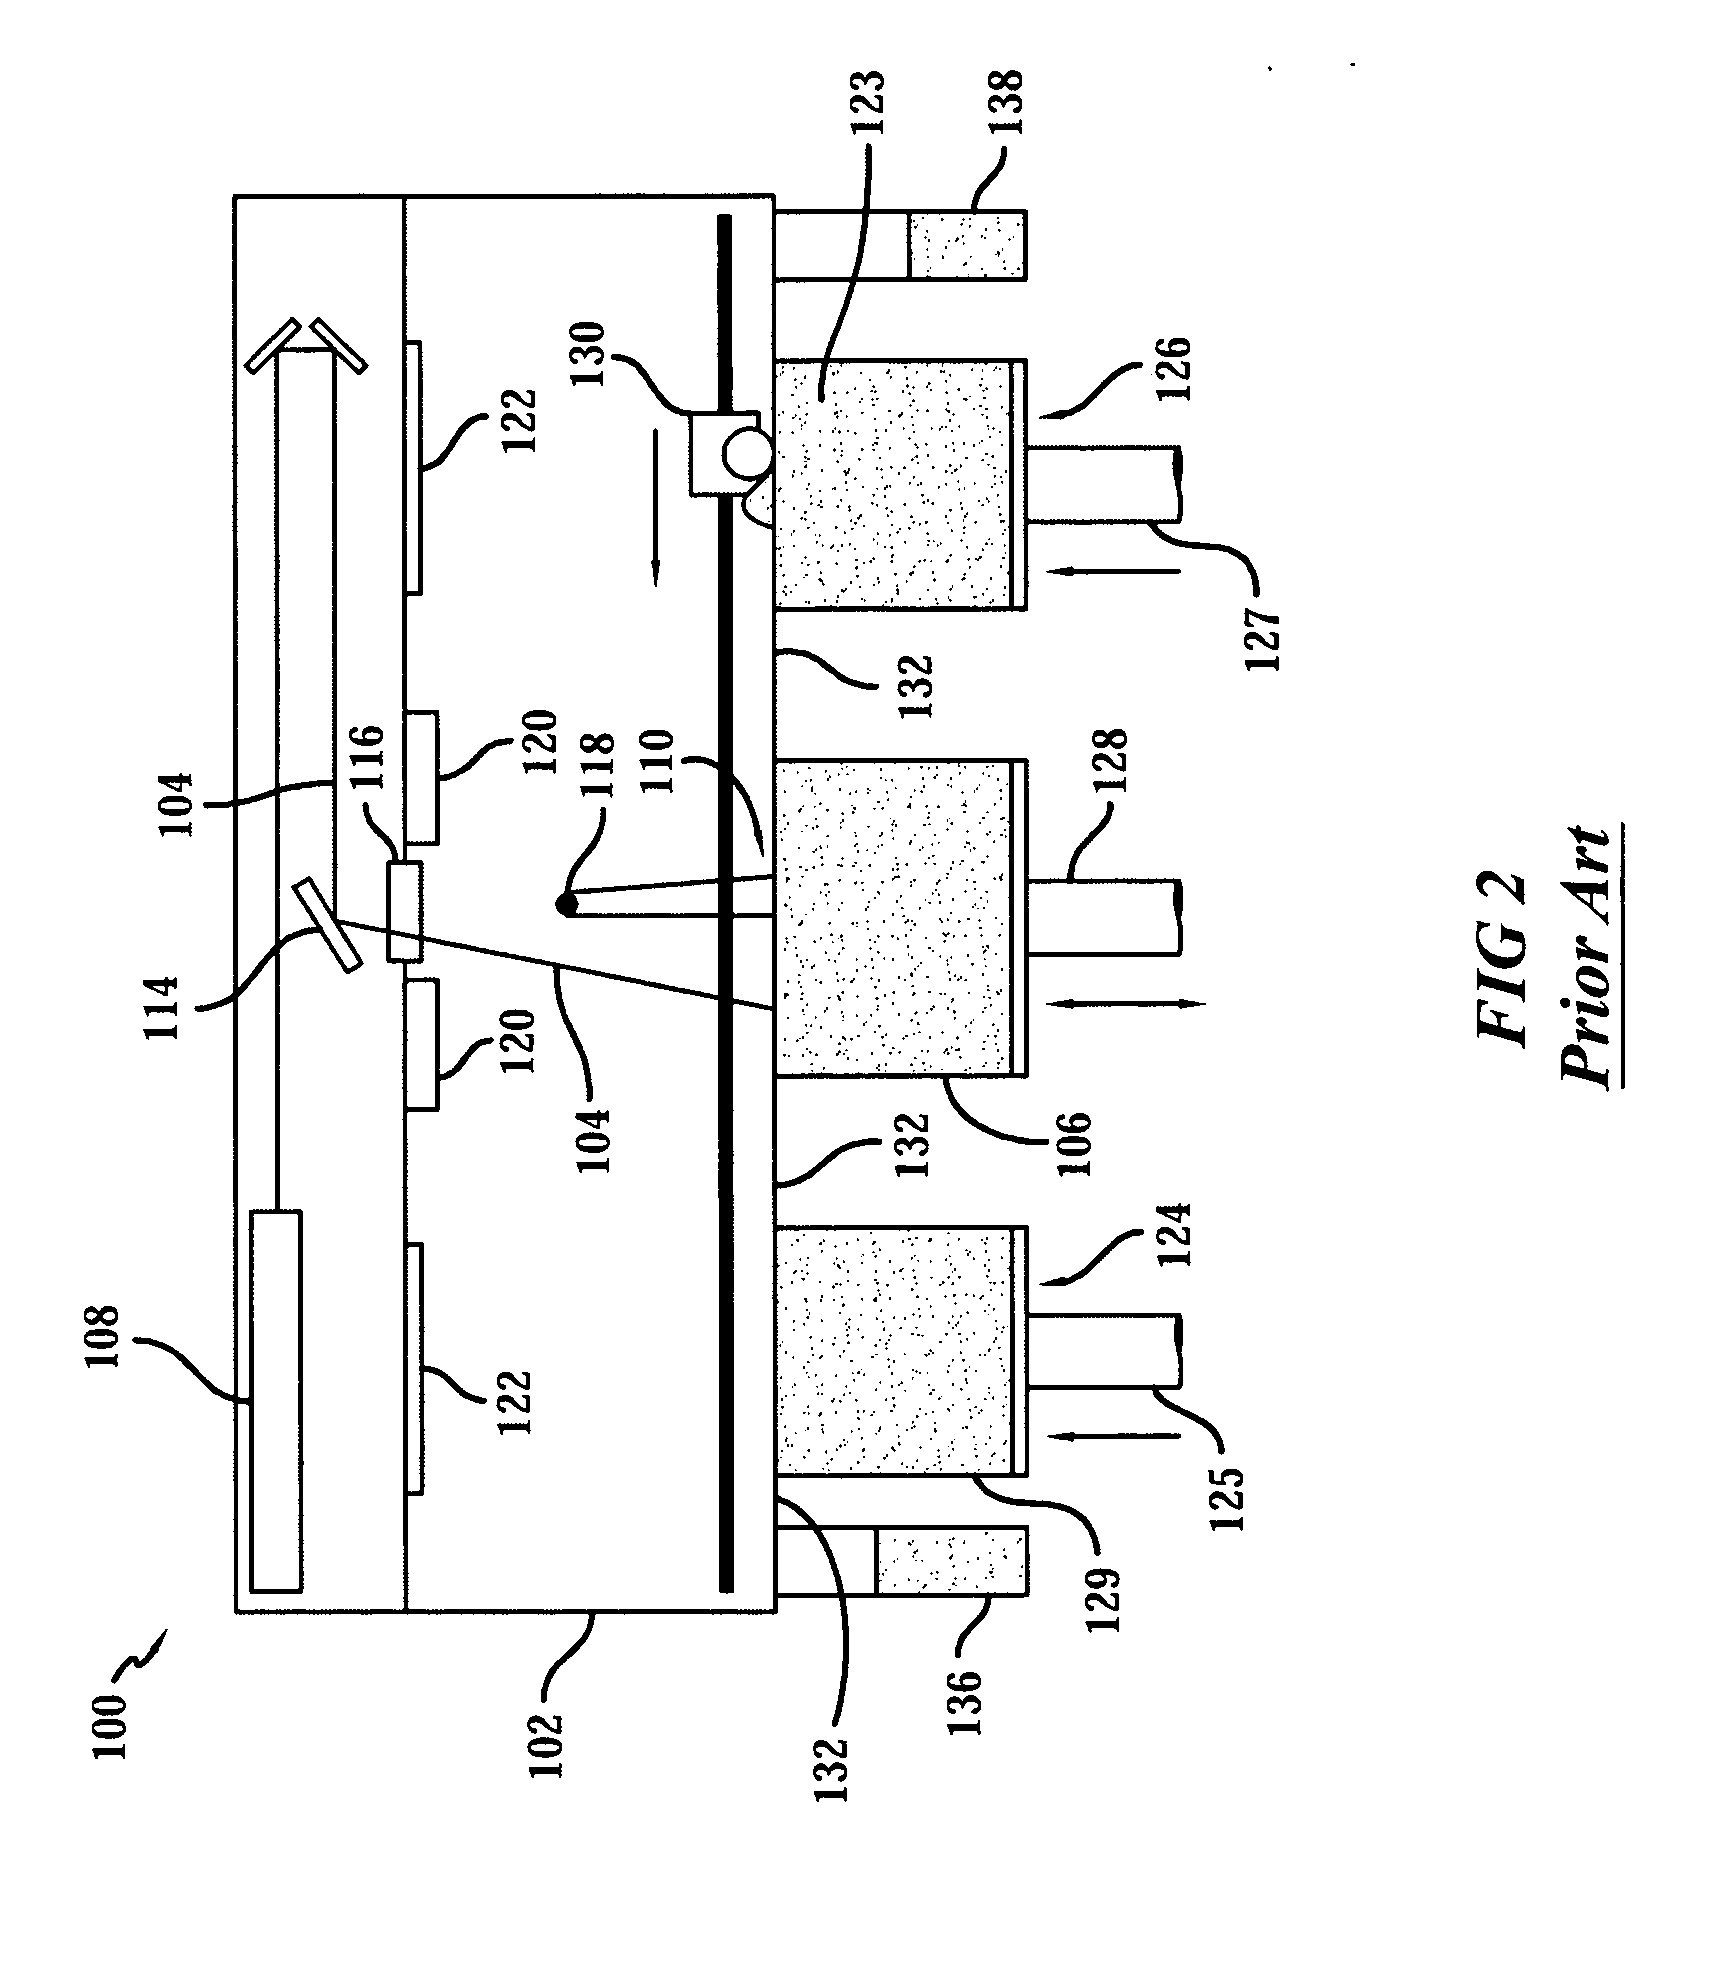 Single side feed parked powder wave heating with wave flattener